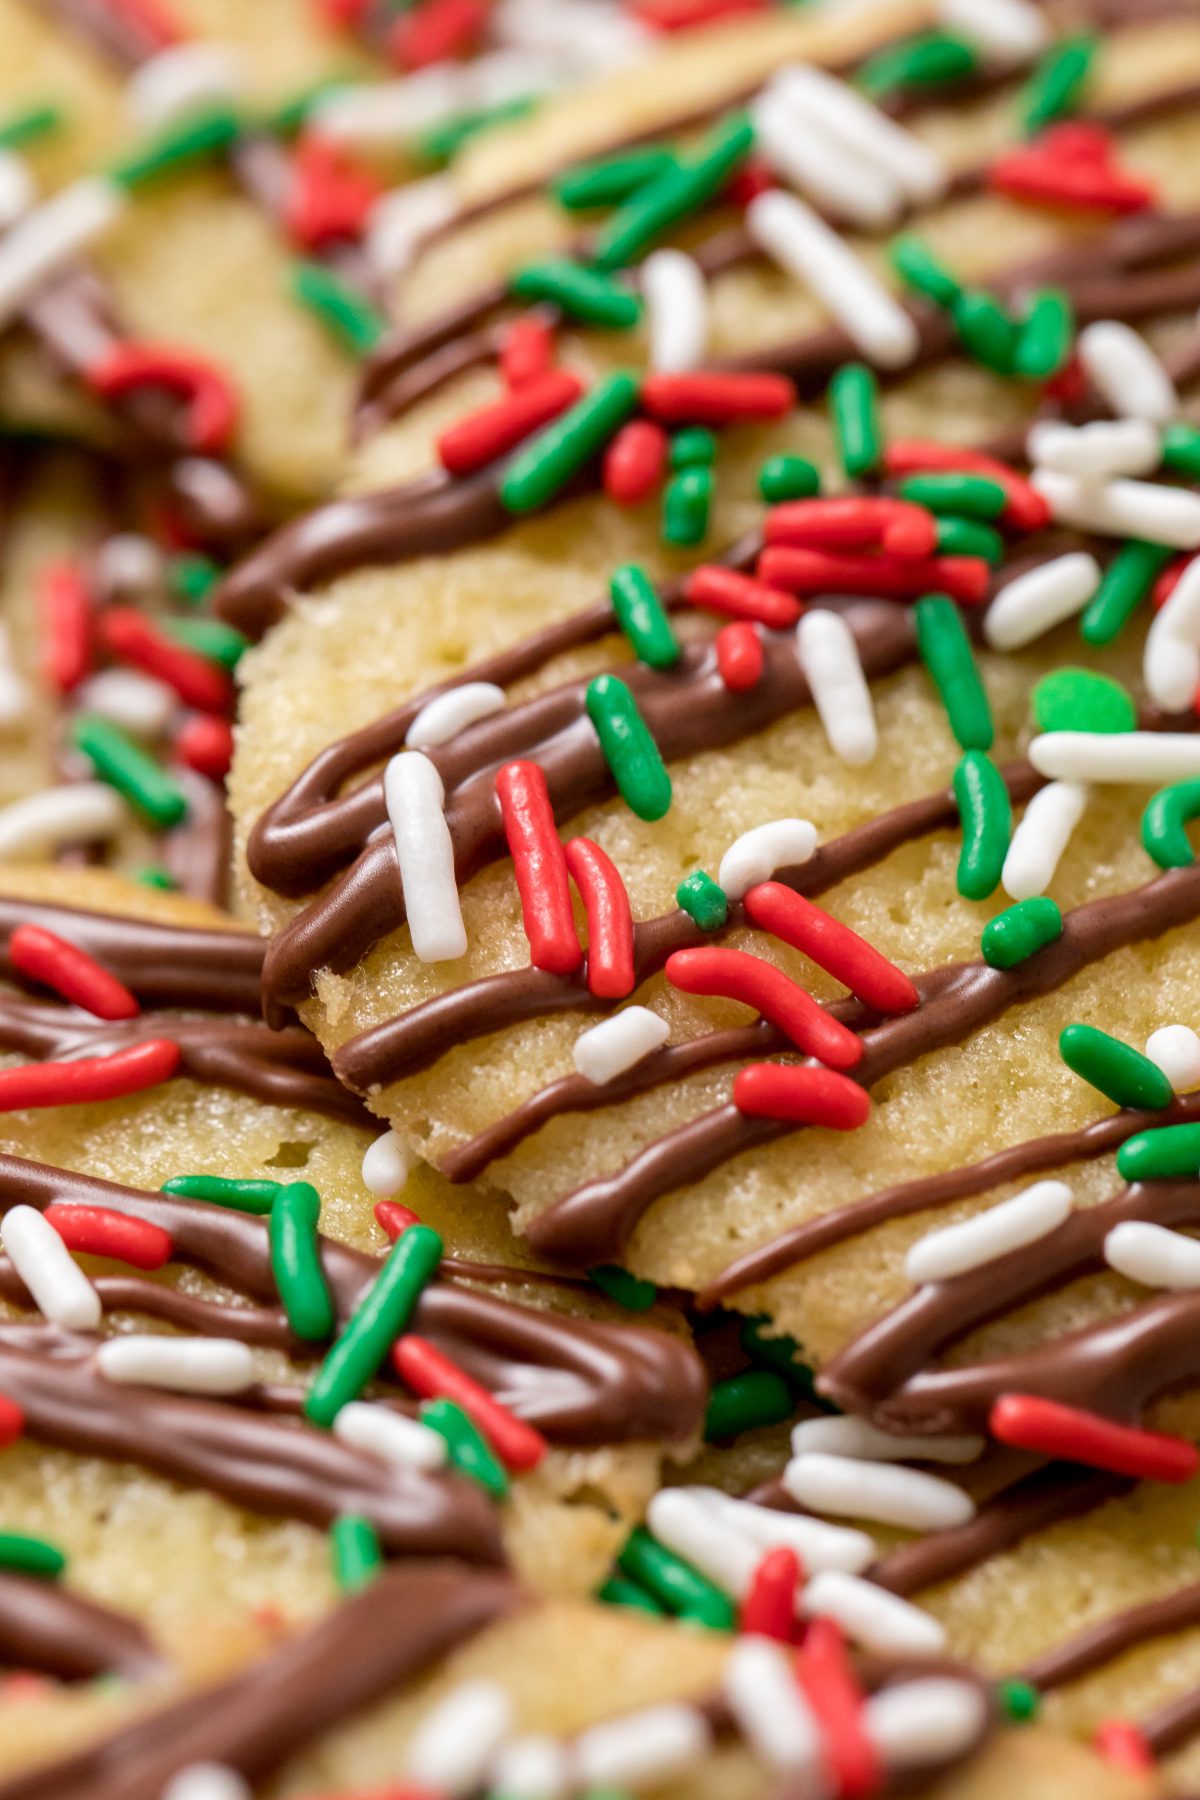 5D4B7004 - Chocolate Drizzled Christmas Cookies with Holiday Jimmies